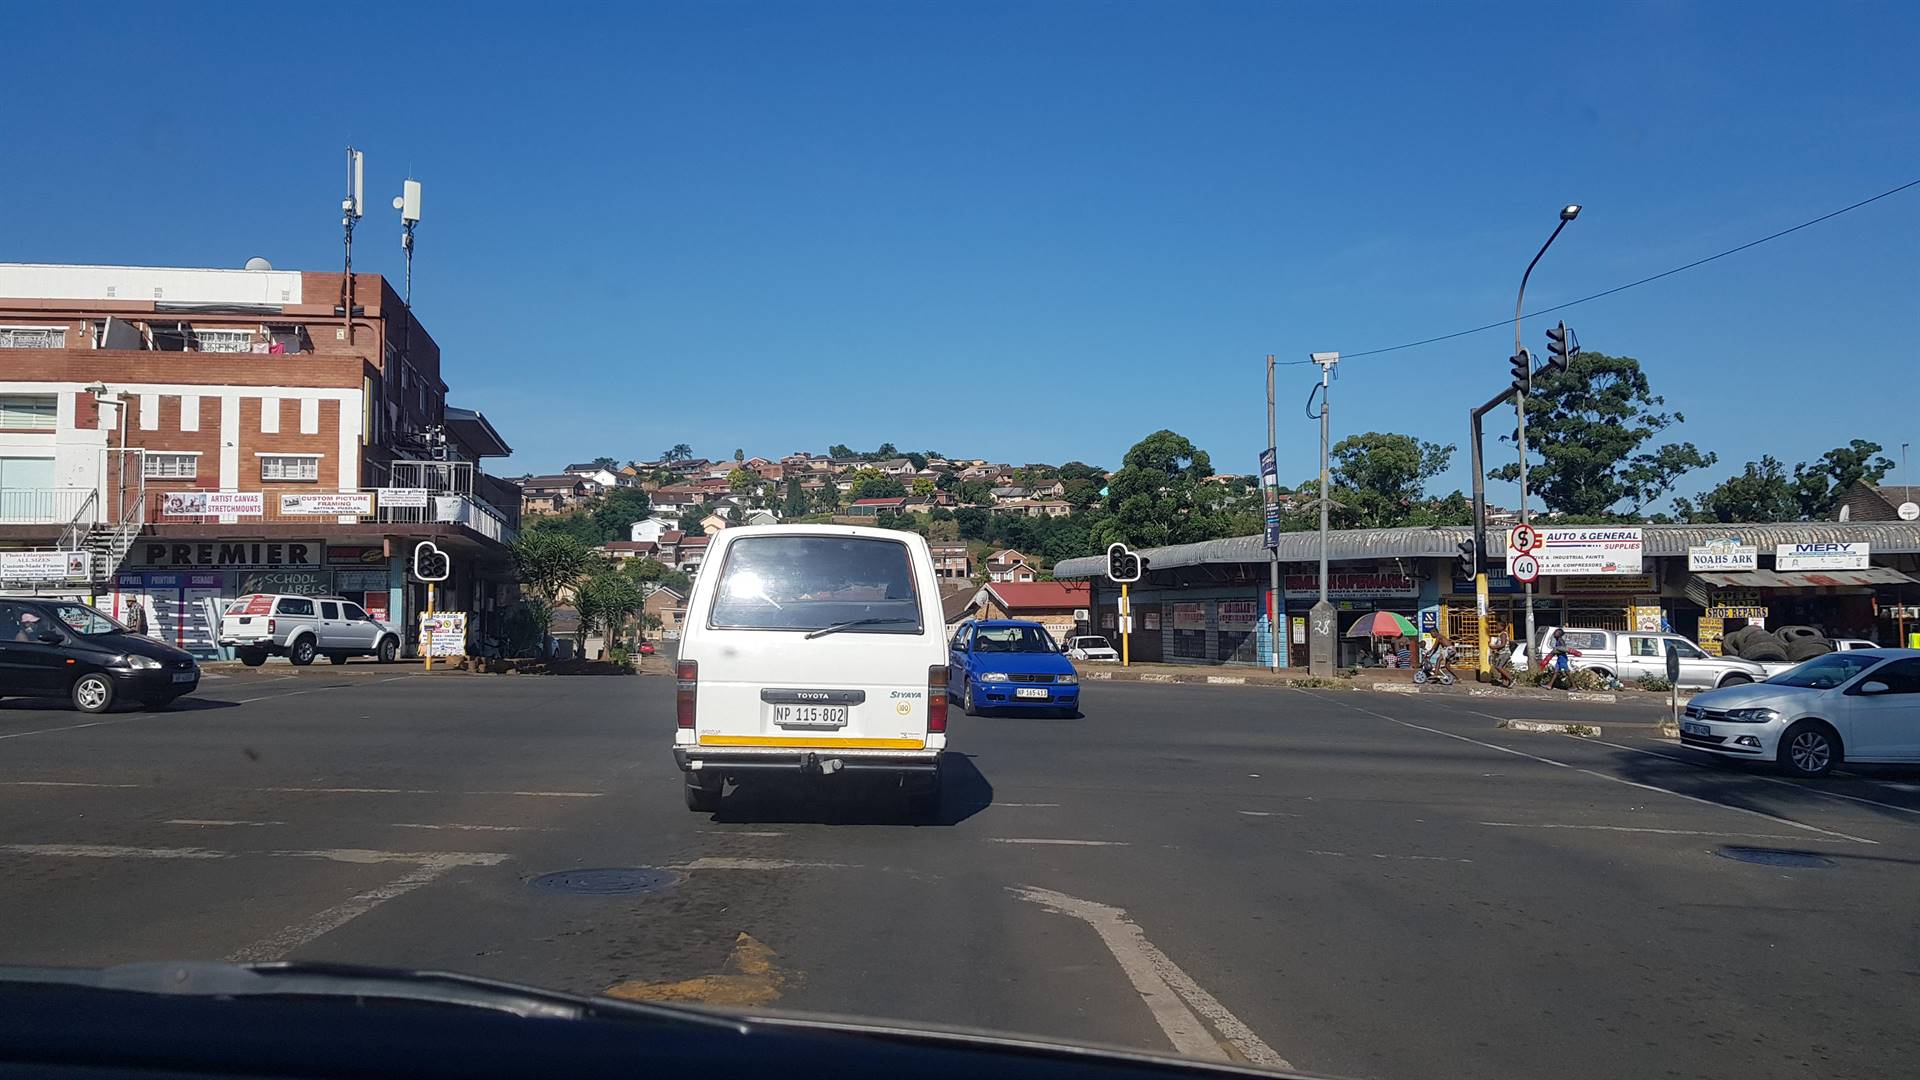 The corner of Dr Chota Motala and Naidoo roads in Raisethorpe where traffic lights have not been working for well over a month now.